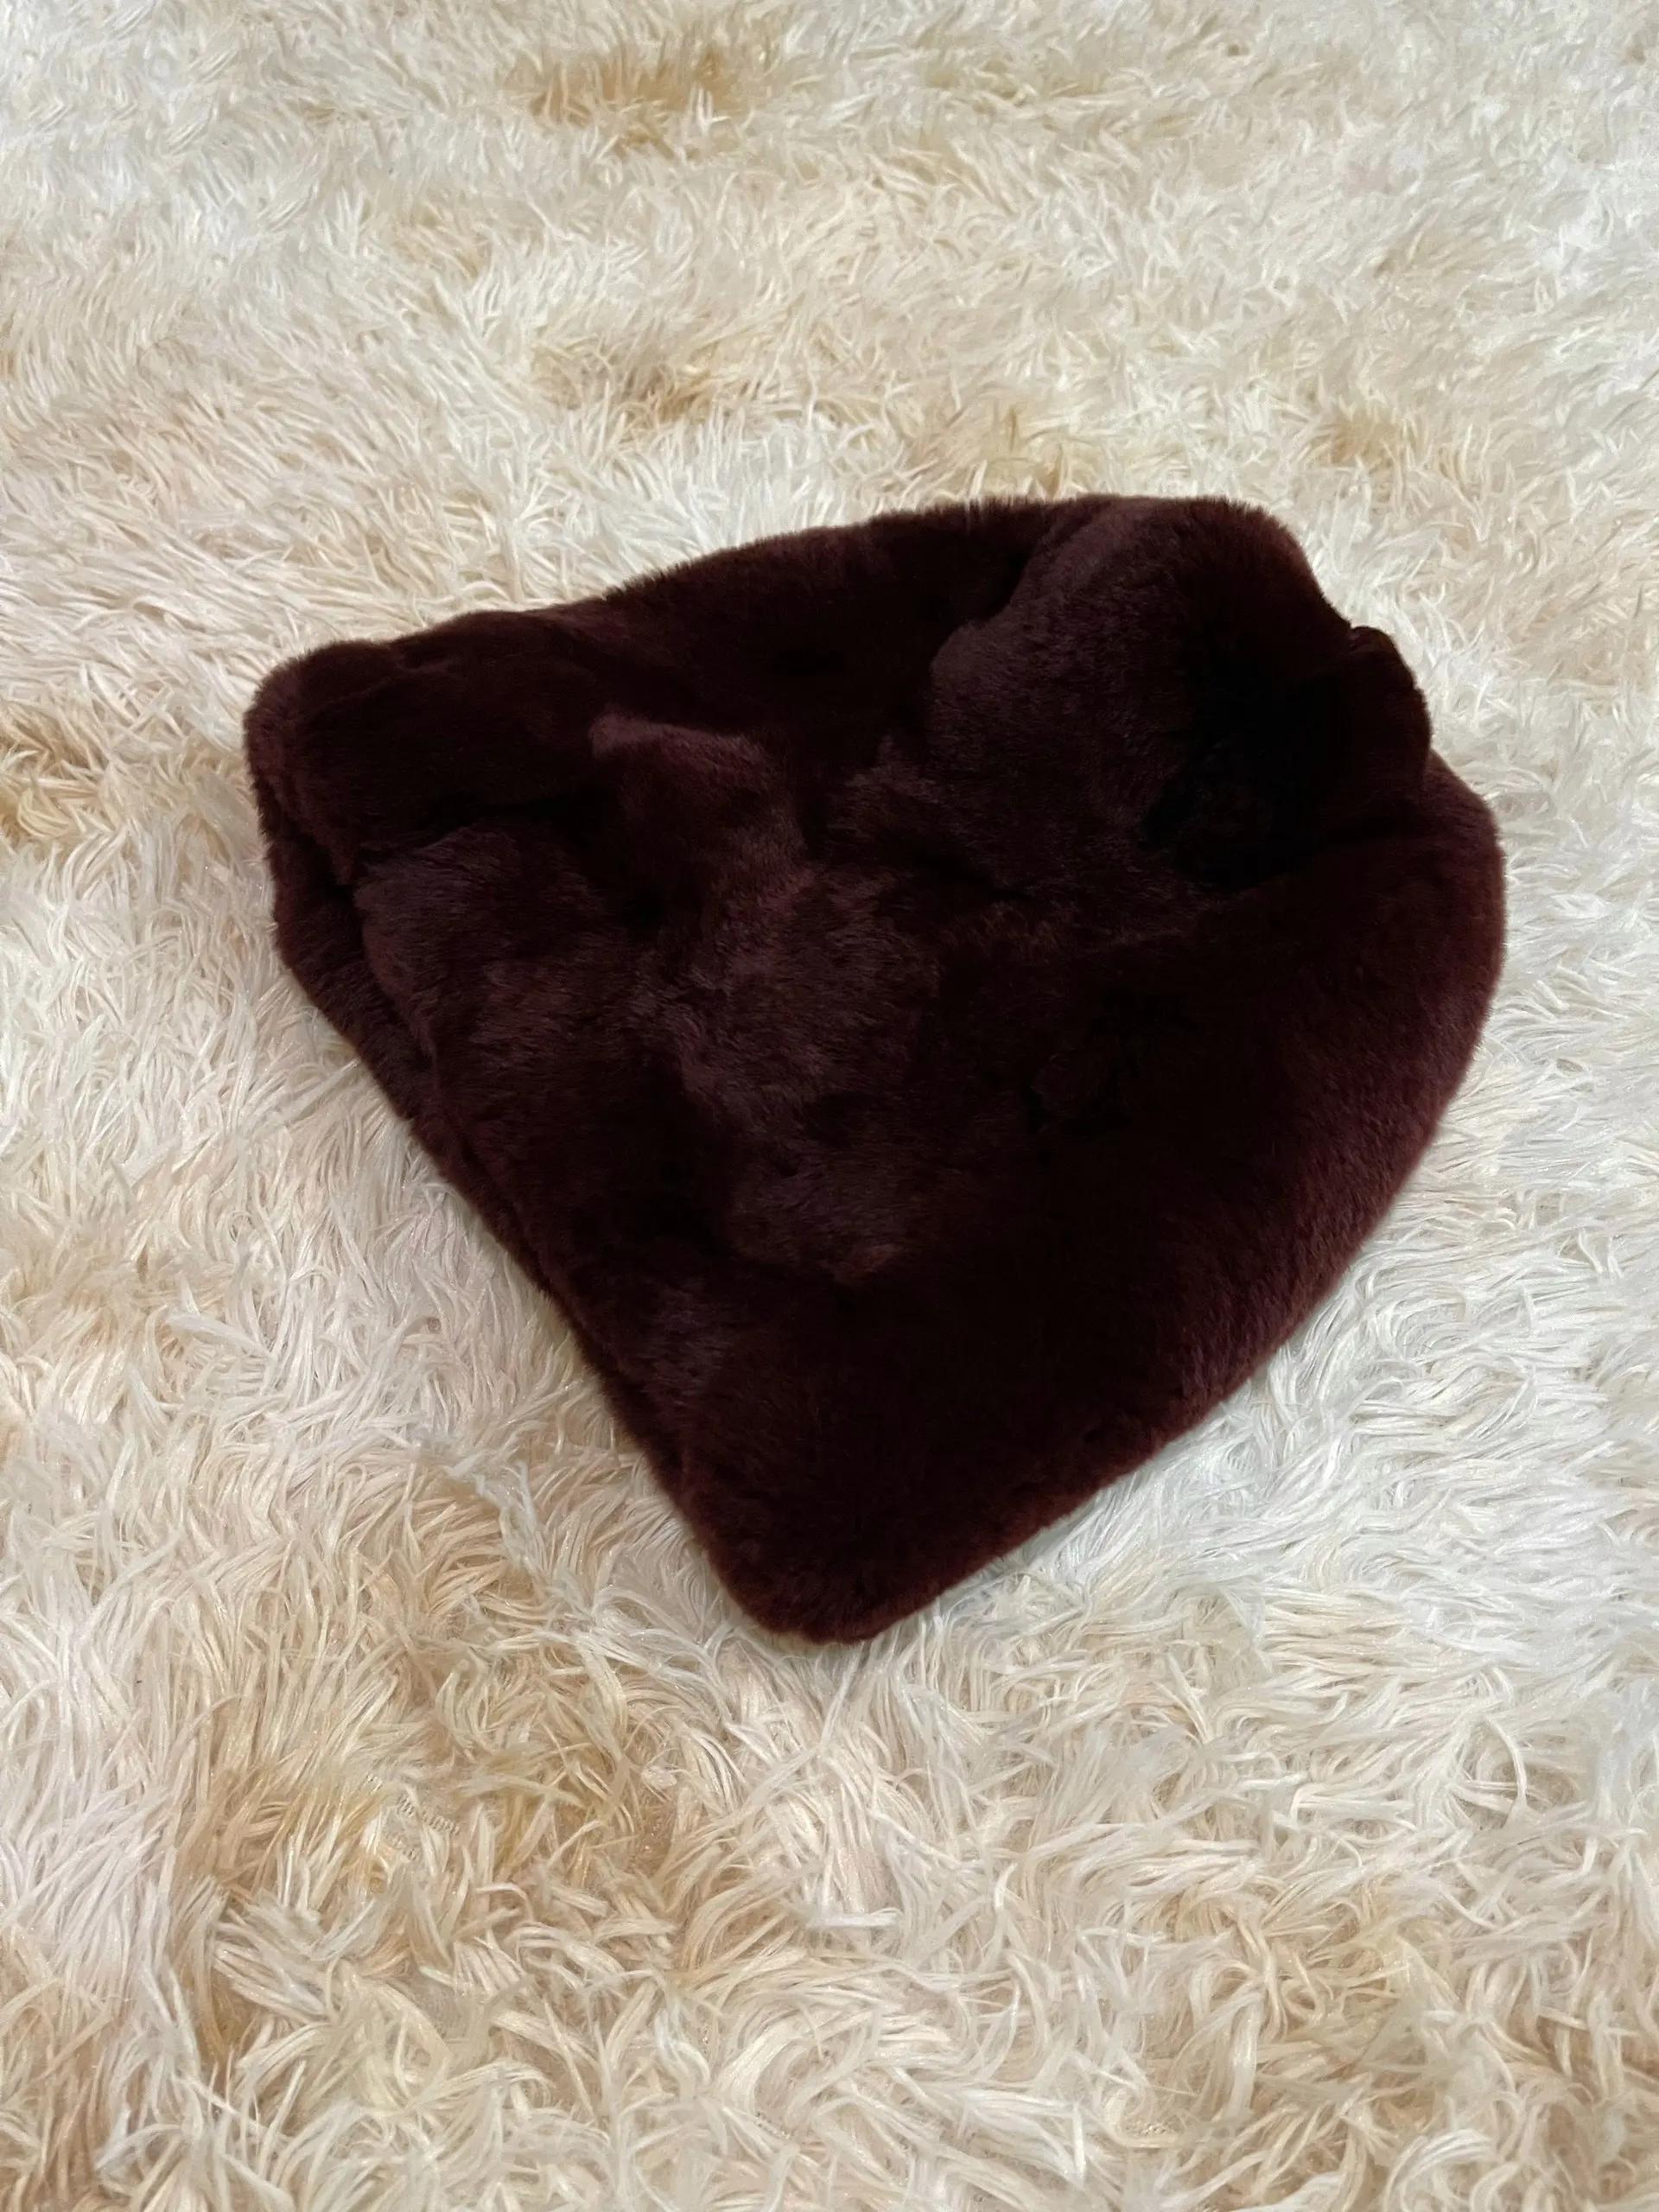 Maroon hat from Marni. Made of rabbit fur.

Size: OS

Condition: 10/10. Pristine.

Feels free to message me with any questions regarding inquiries